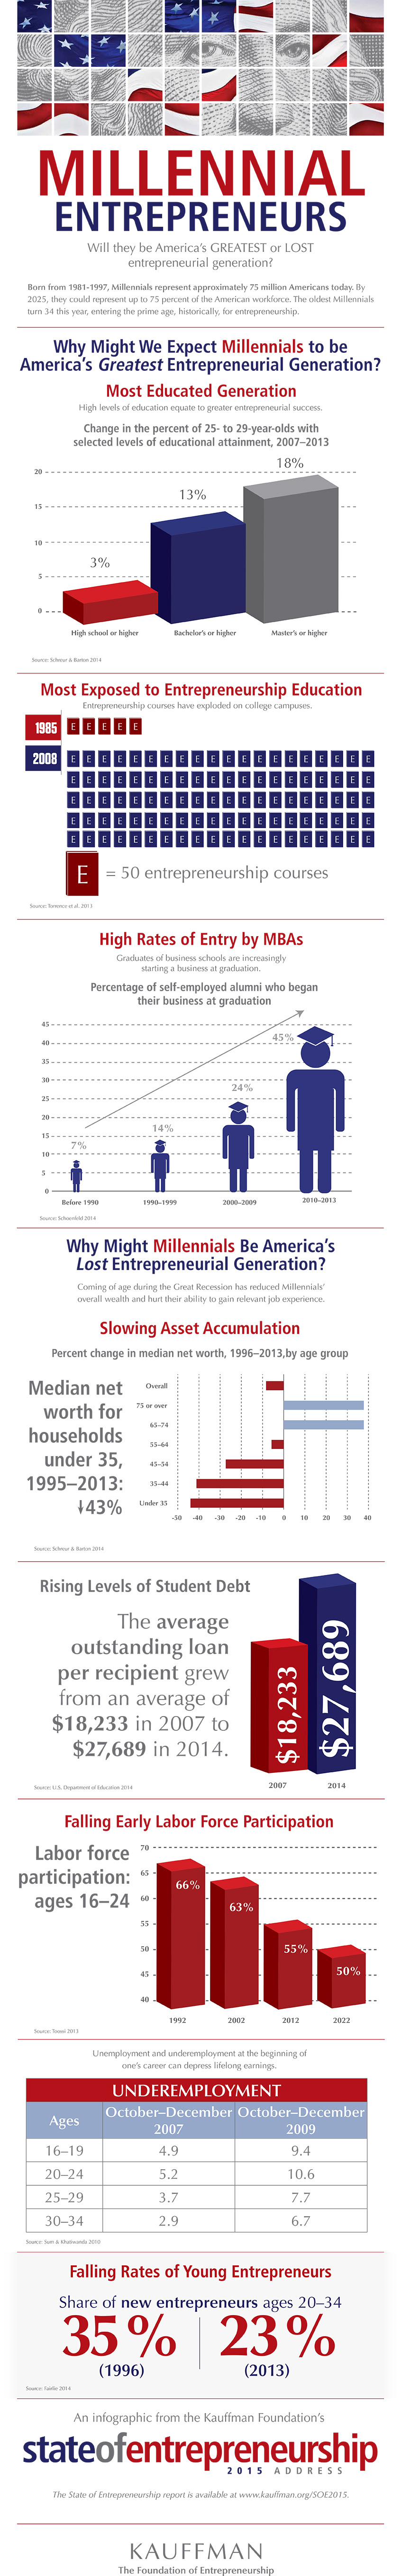  From http://www.kauffman.org/multimedia/infographics/2015/infographic-millennial-entrepreneurs-and-the-state-of-entrepreneurship 